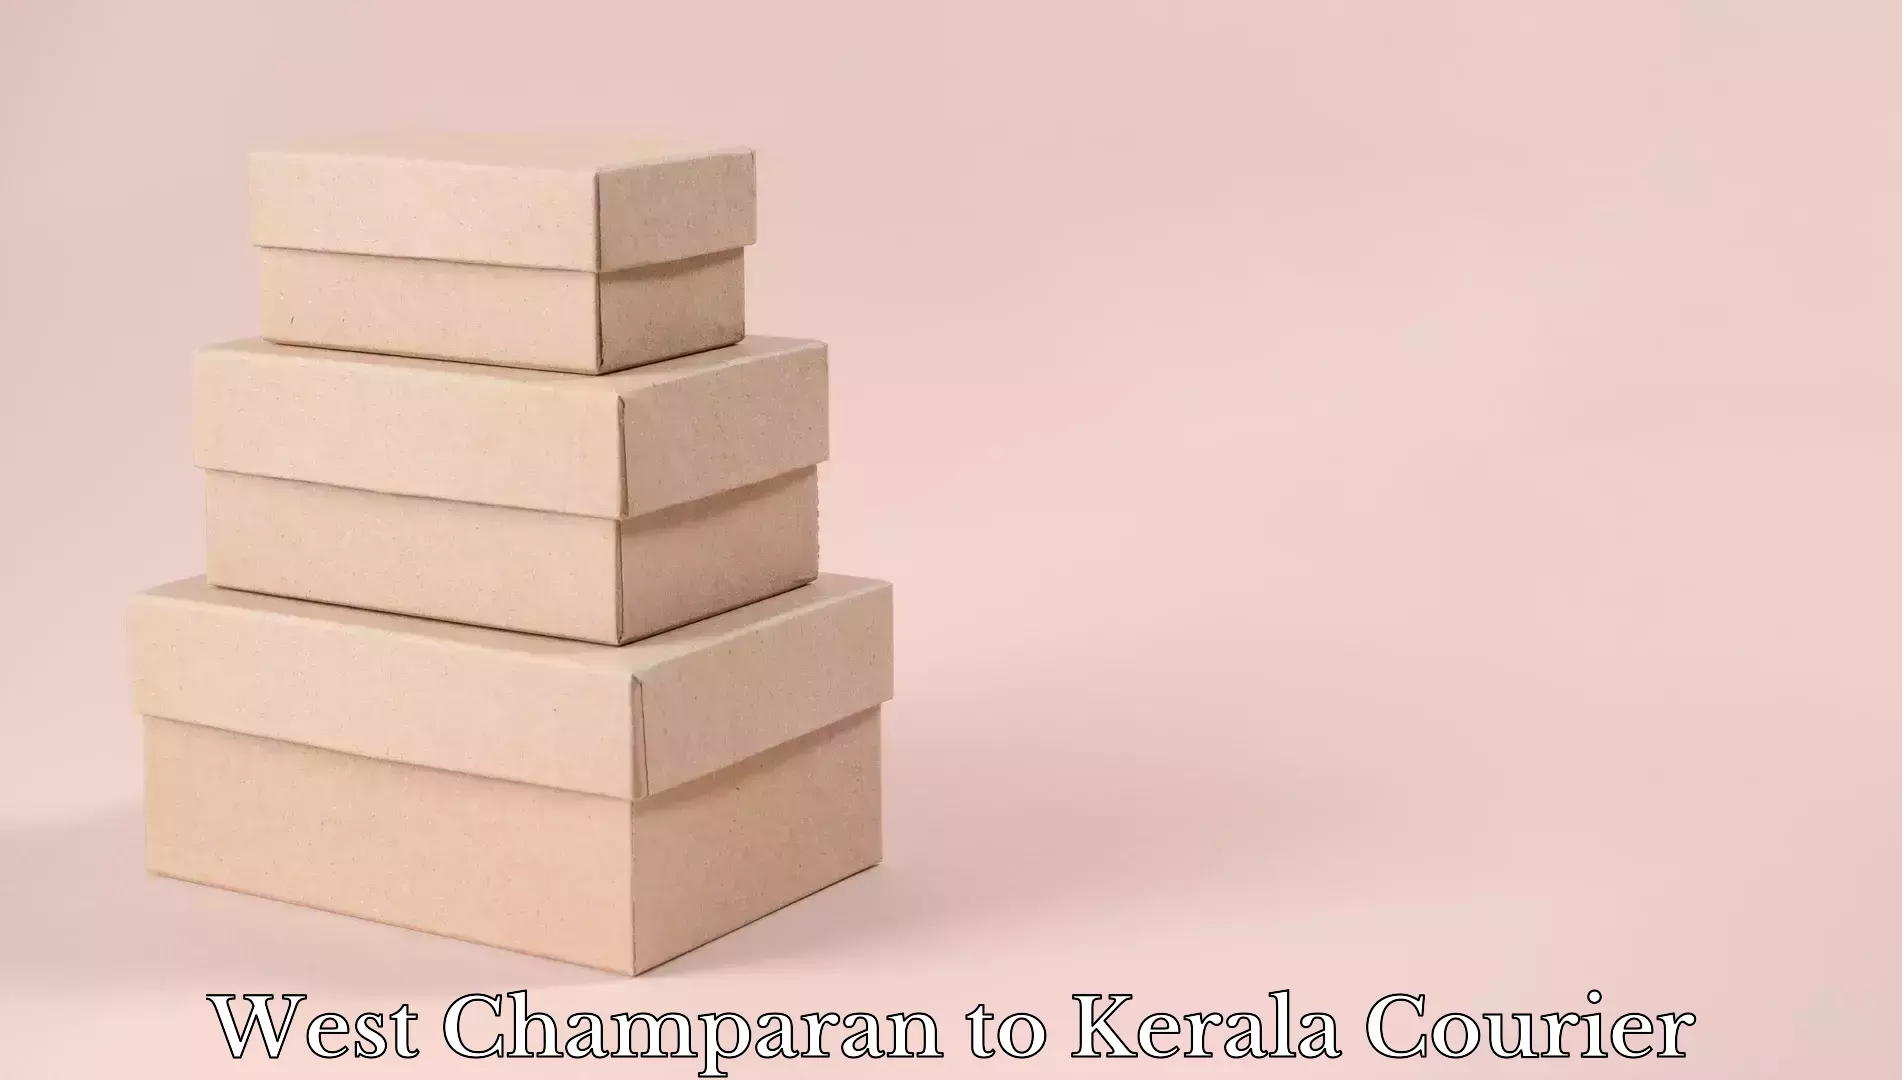 Luggage delivery app West Champaran to Munnar